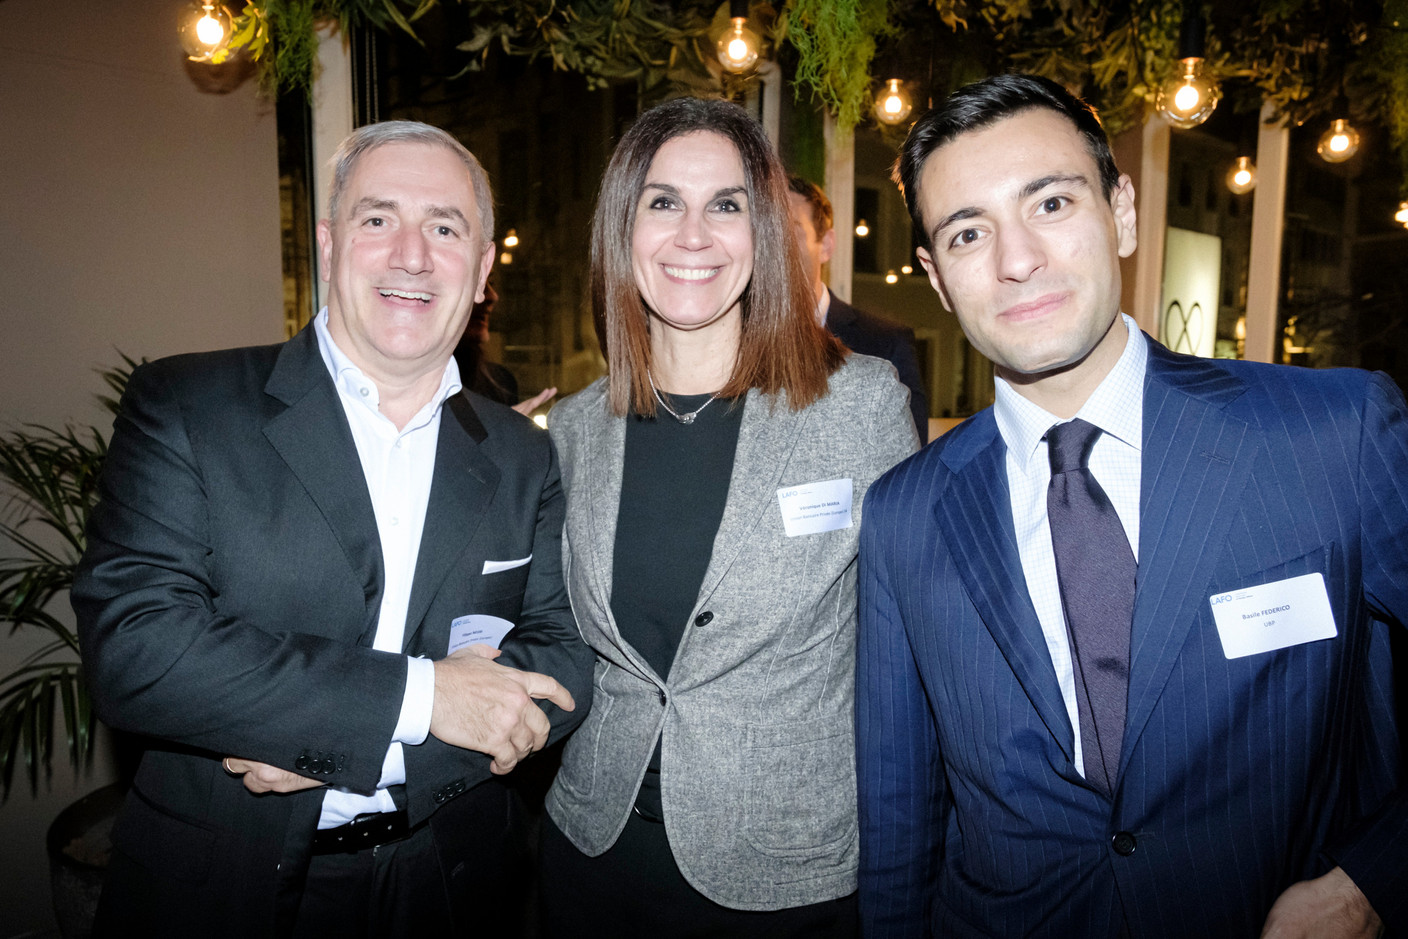 Filippo Negri, Véronique Di-Maria and Basile Federico (UBP) at the Luxembourg Association of Family Offices (LAFO) winter 2023 cocktail, which took place on 8 February 2023 at Hertz PopUp. Photo: Jan Hanrion for LAFO